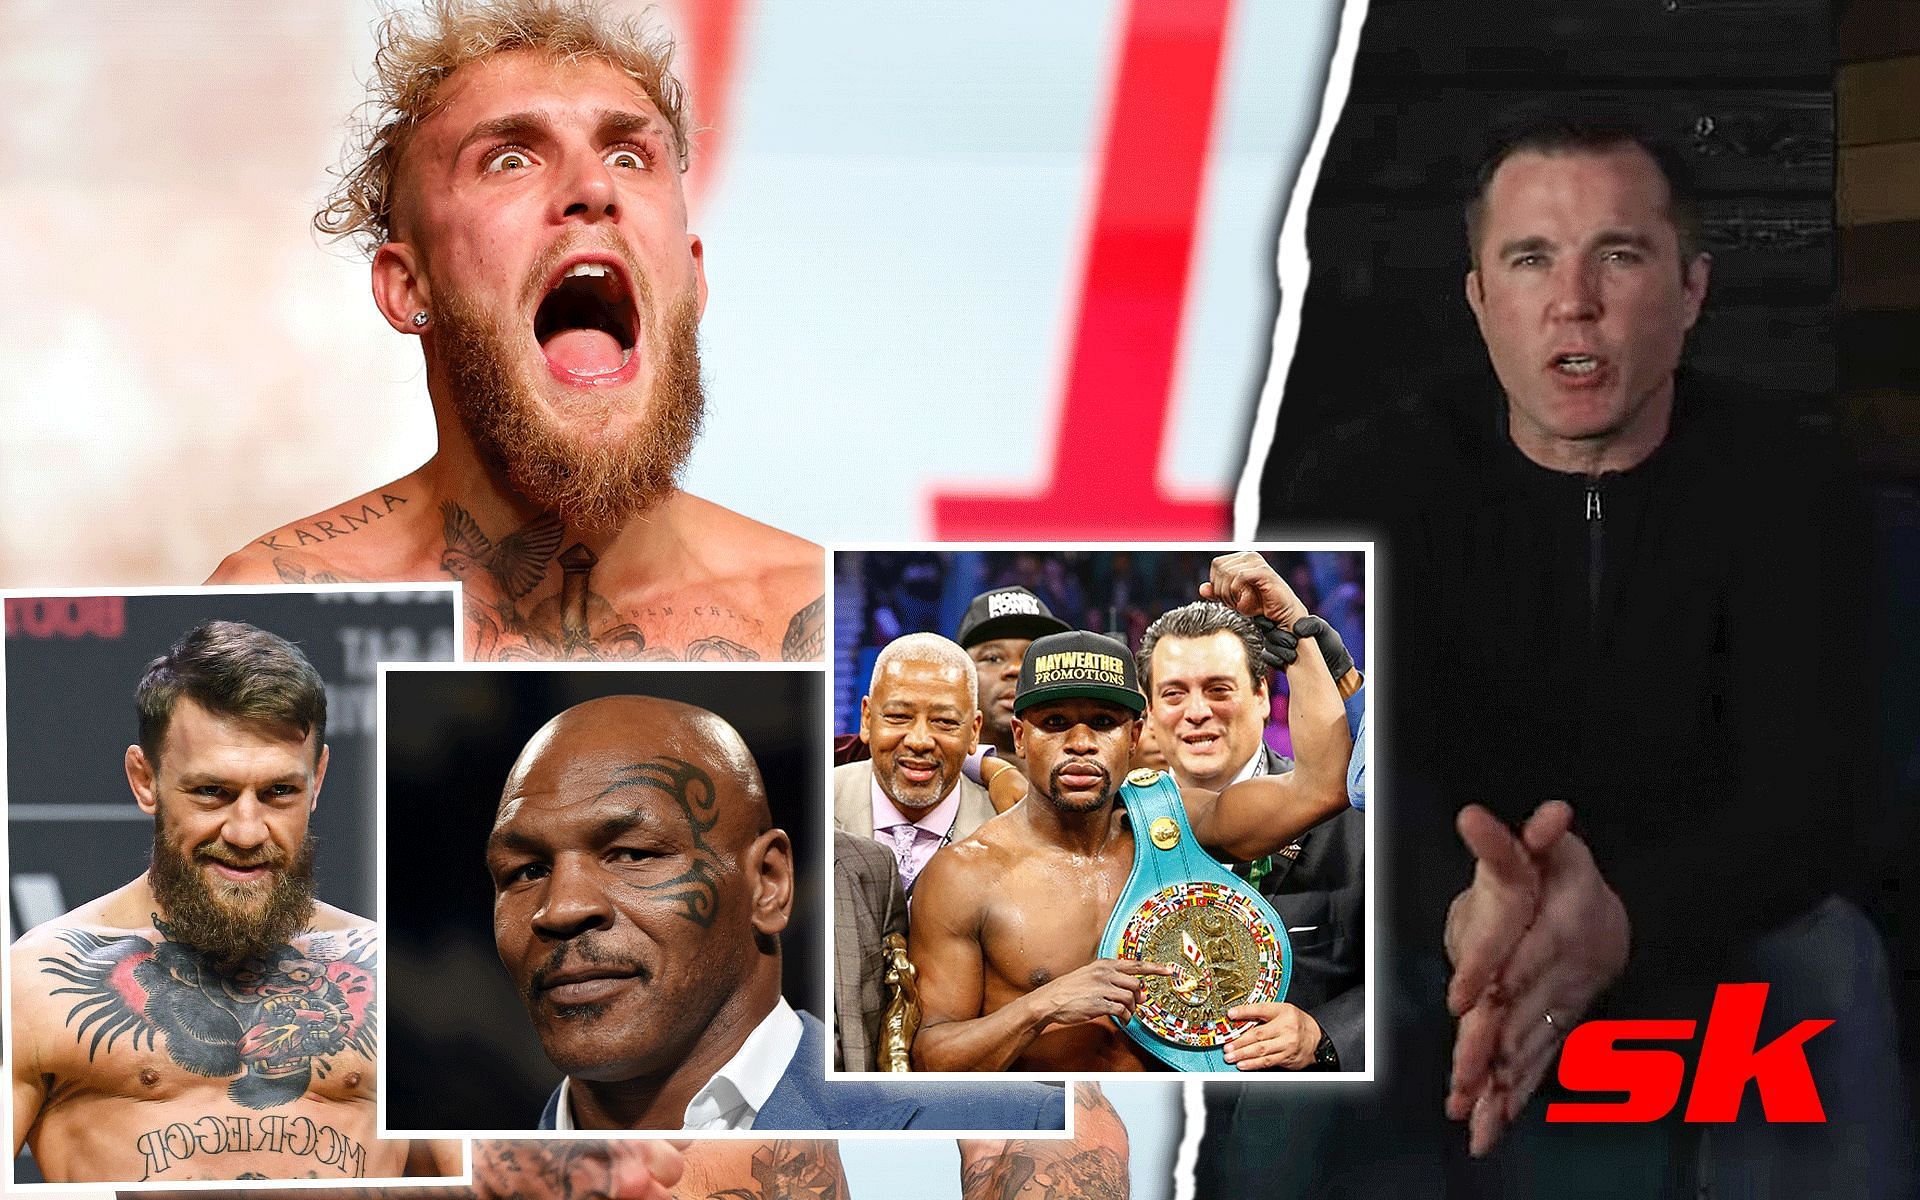 Conor McGregor (left), Mike Tyson (center), Floyd Mayweather (right), Jake Paul (top center), and Chael Sonnen (far right). [Images courtesy: far right image from YouTube Chael Sonnen and the rest from Getty Images]